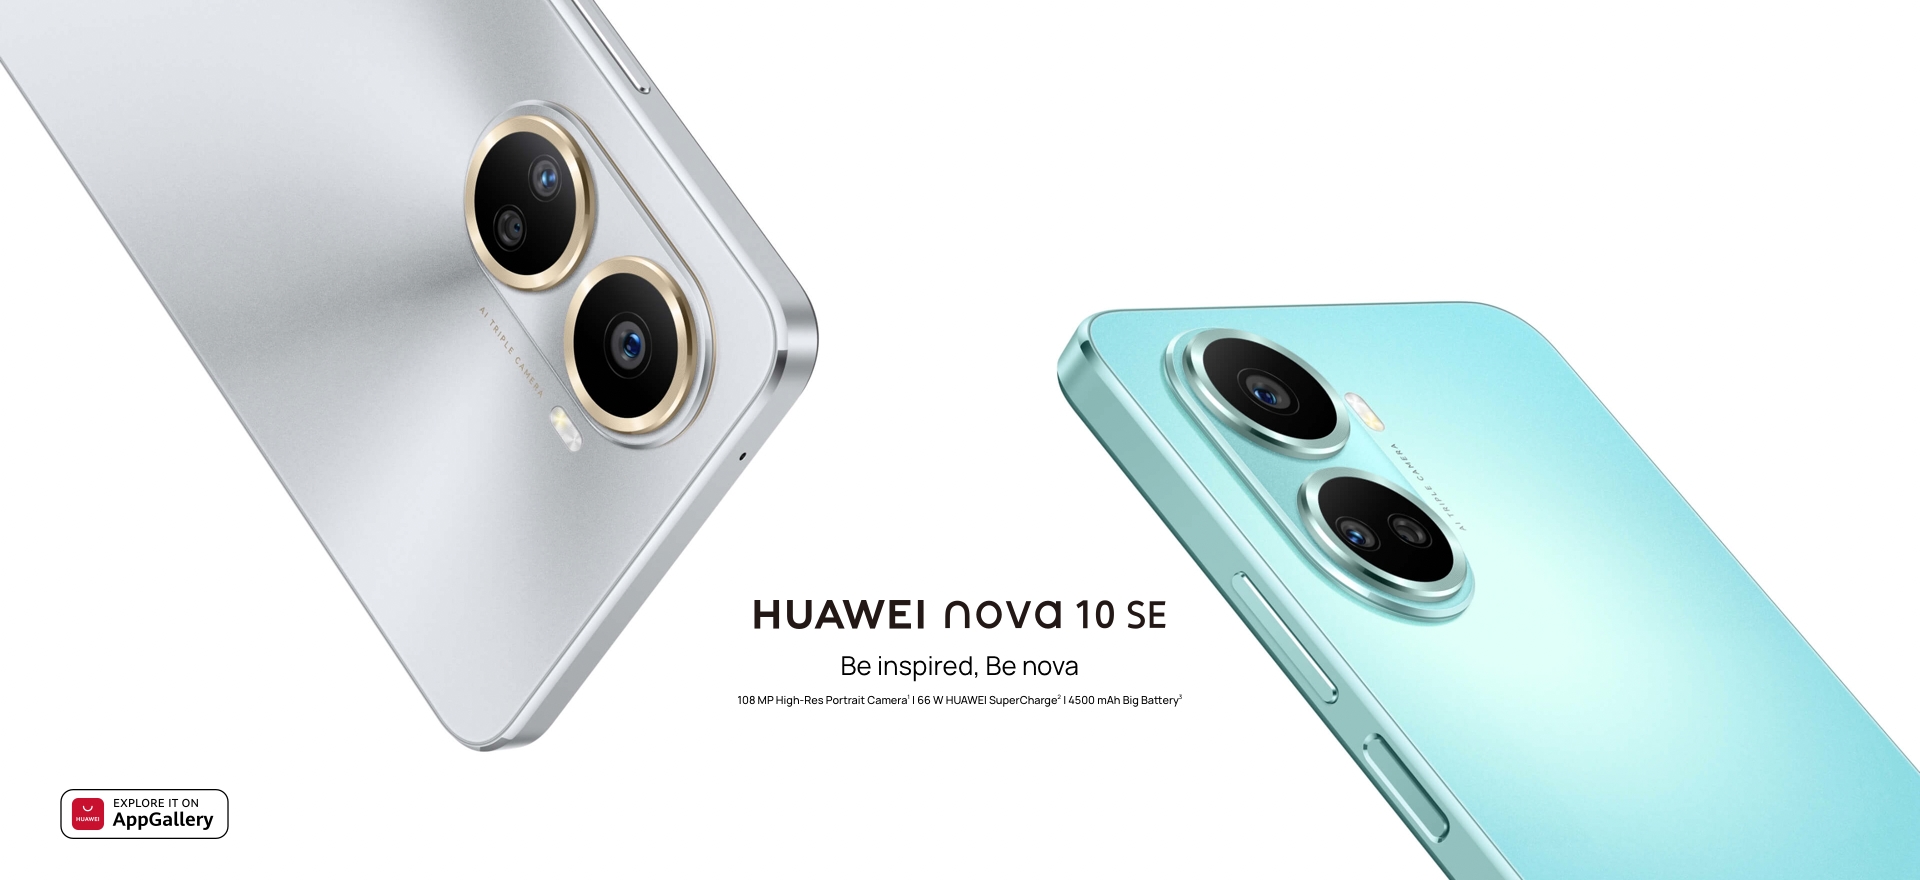 Snapdragon 680G chip, 108 MP camera and 66W fast charging: Huawei revealed detailed specifications of Nova 10 SE smartphone